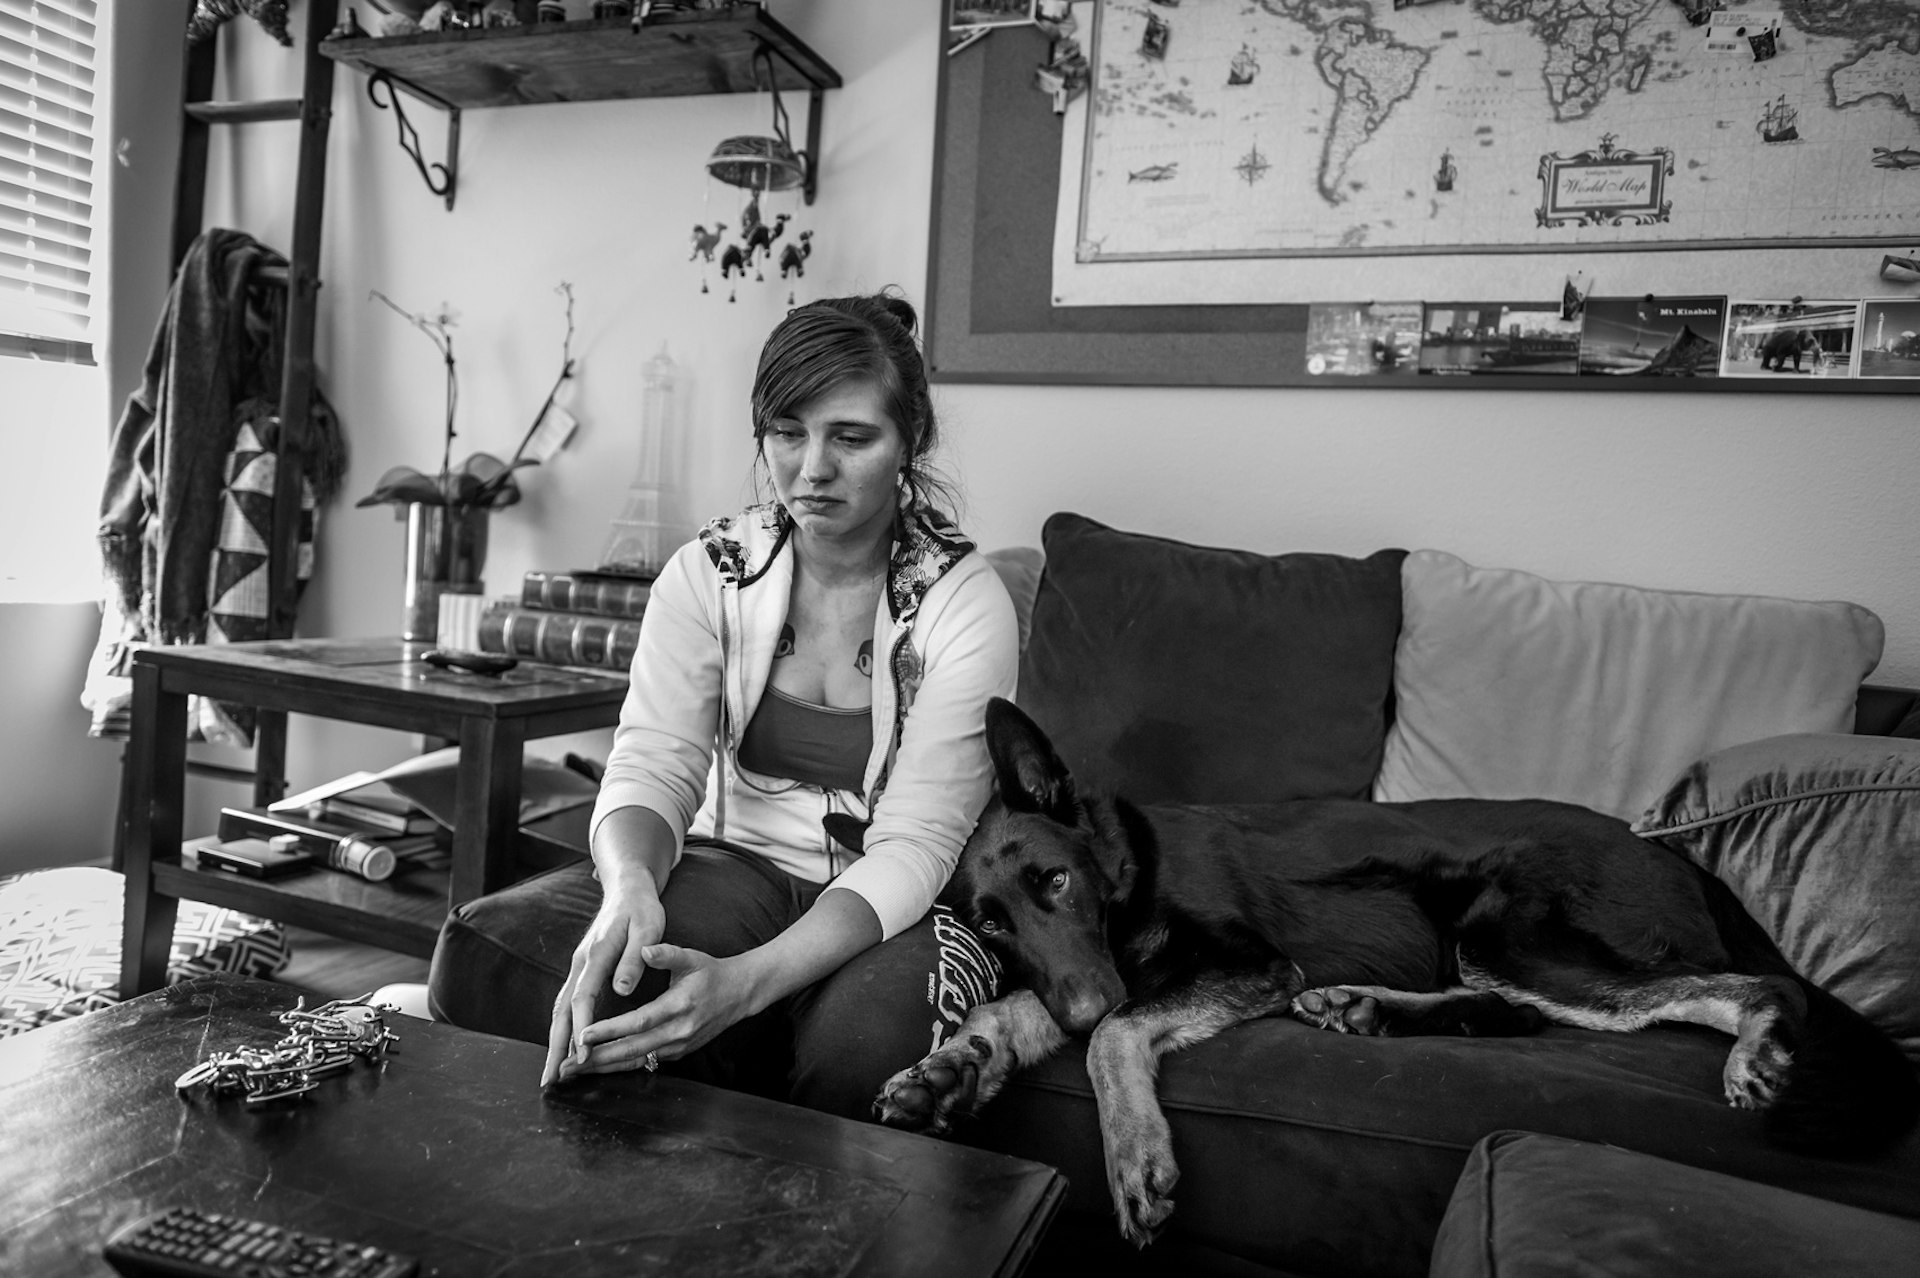 Brittany Fintel was forced to leave the US Navy after she was pinned down on a bed by her lead petty officer while stationed in Bahrain. When she reported the incident she was told she had an 'adjustment disorder'. "They kick the victim out. The victim is apparently more fucked in the head than the rapist," she says. Her PTSD service dog Indiana is never far from her side. Photo: Mary F. Calvert.